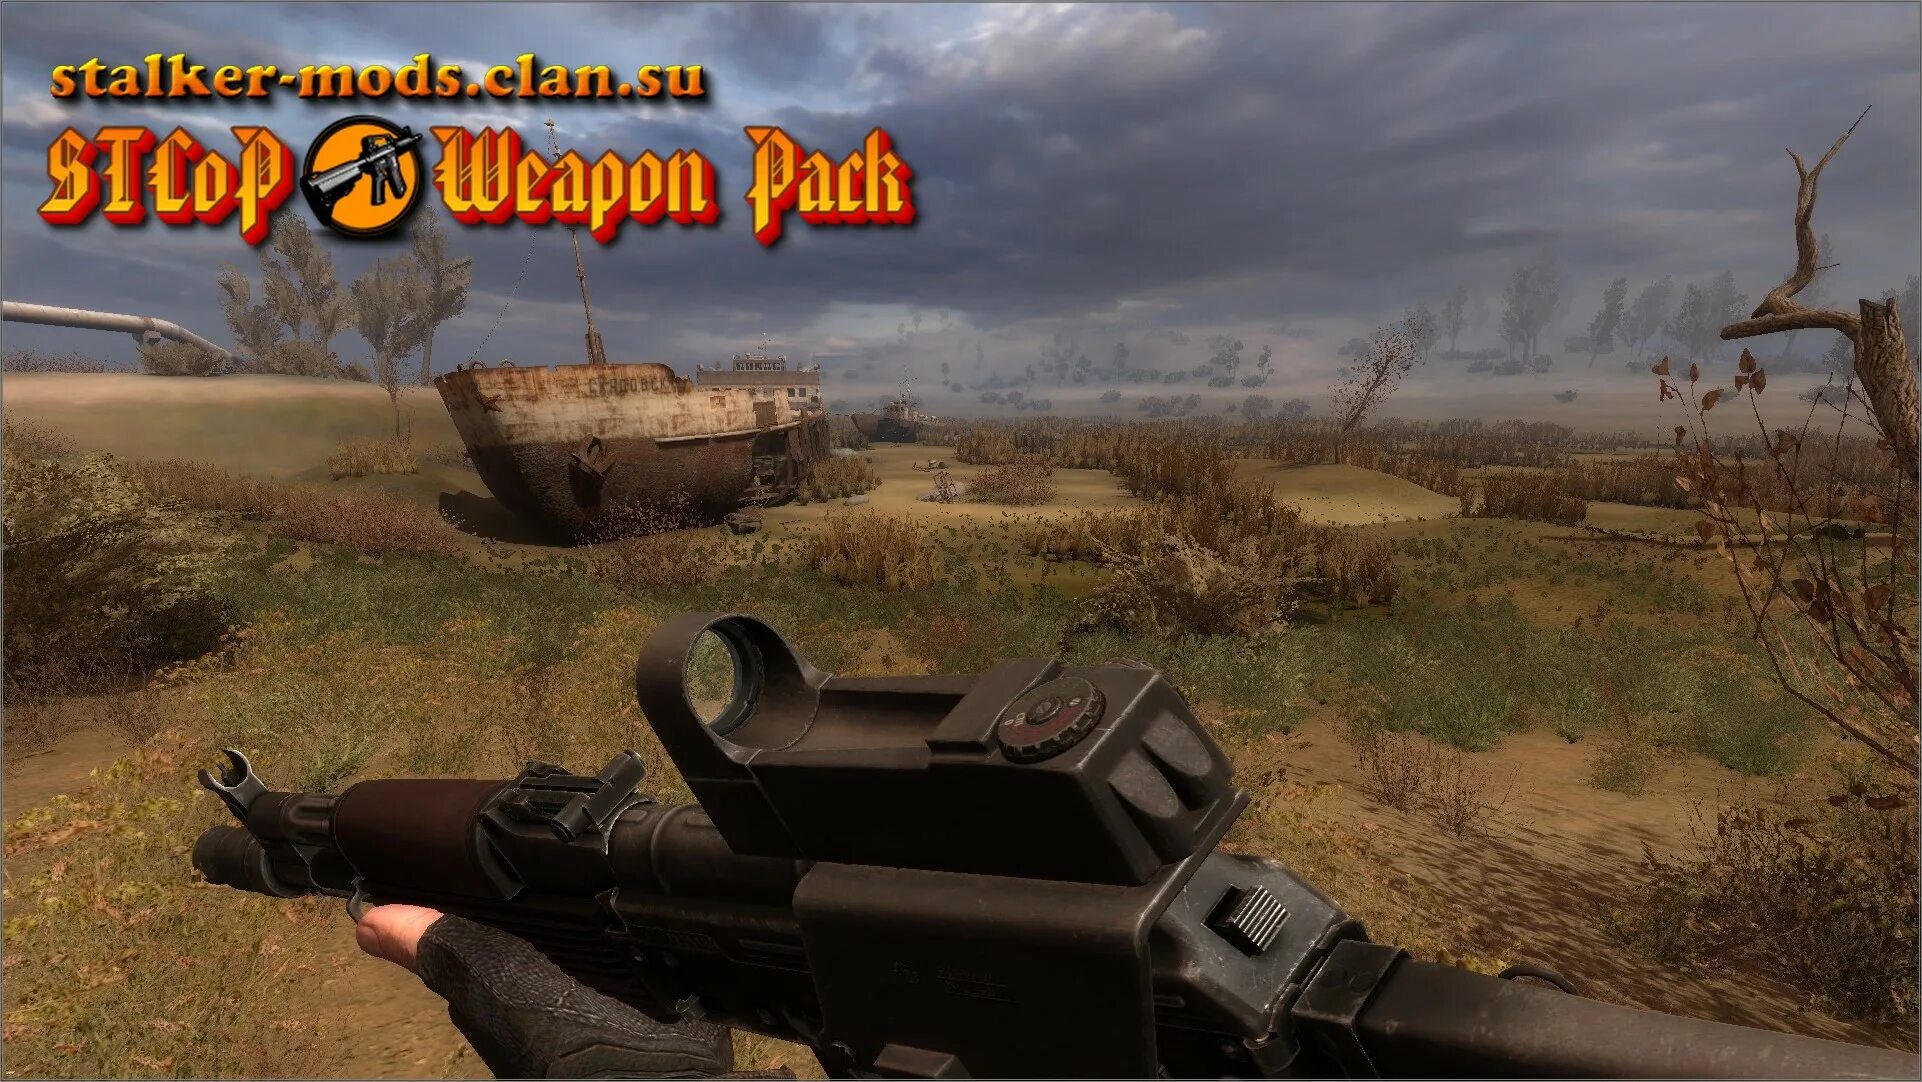 Сталкер STCOP Weapon Pack. STCOP Weapon Pack 3.5. STCOP Weapon Pack 3.3. STCOP Weapon Pack 2.